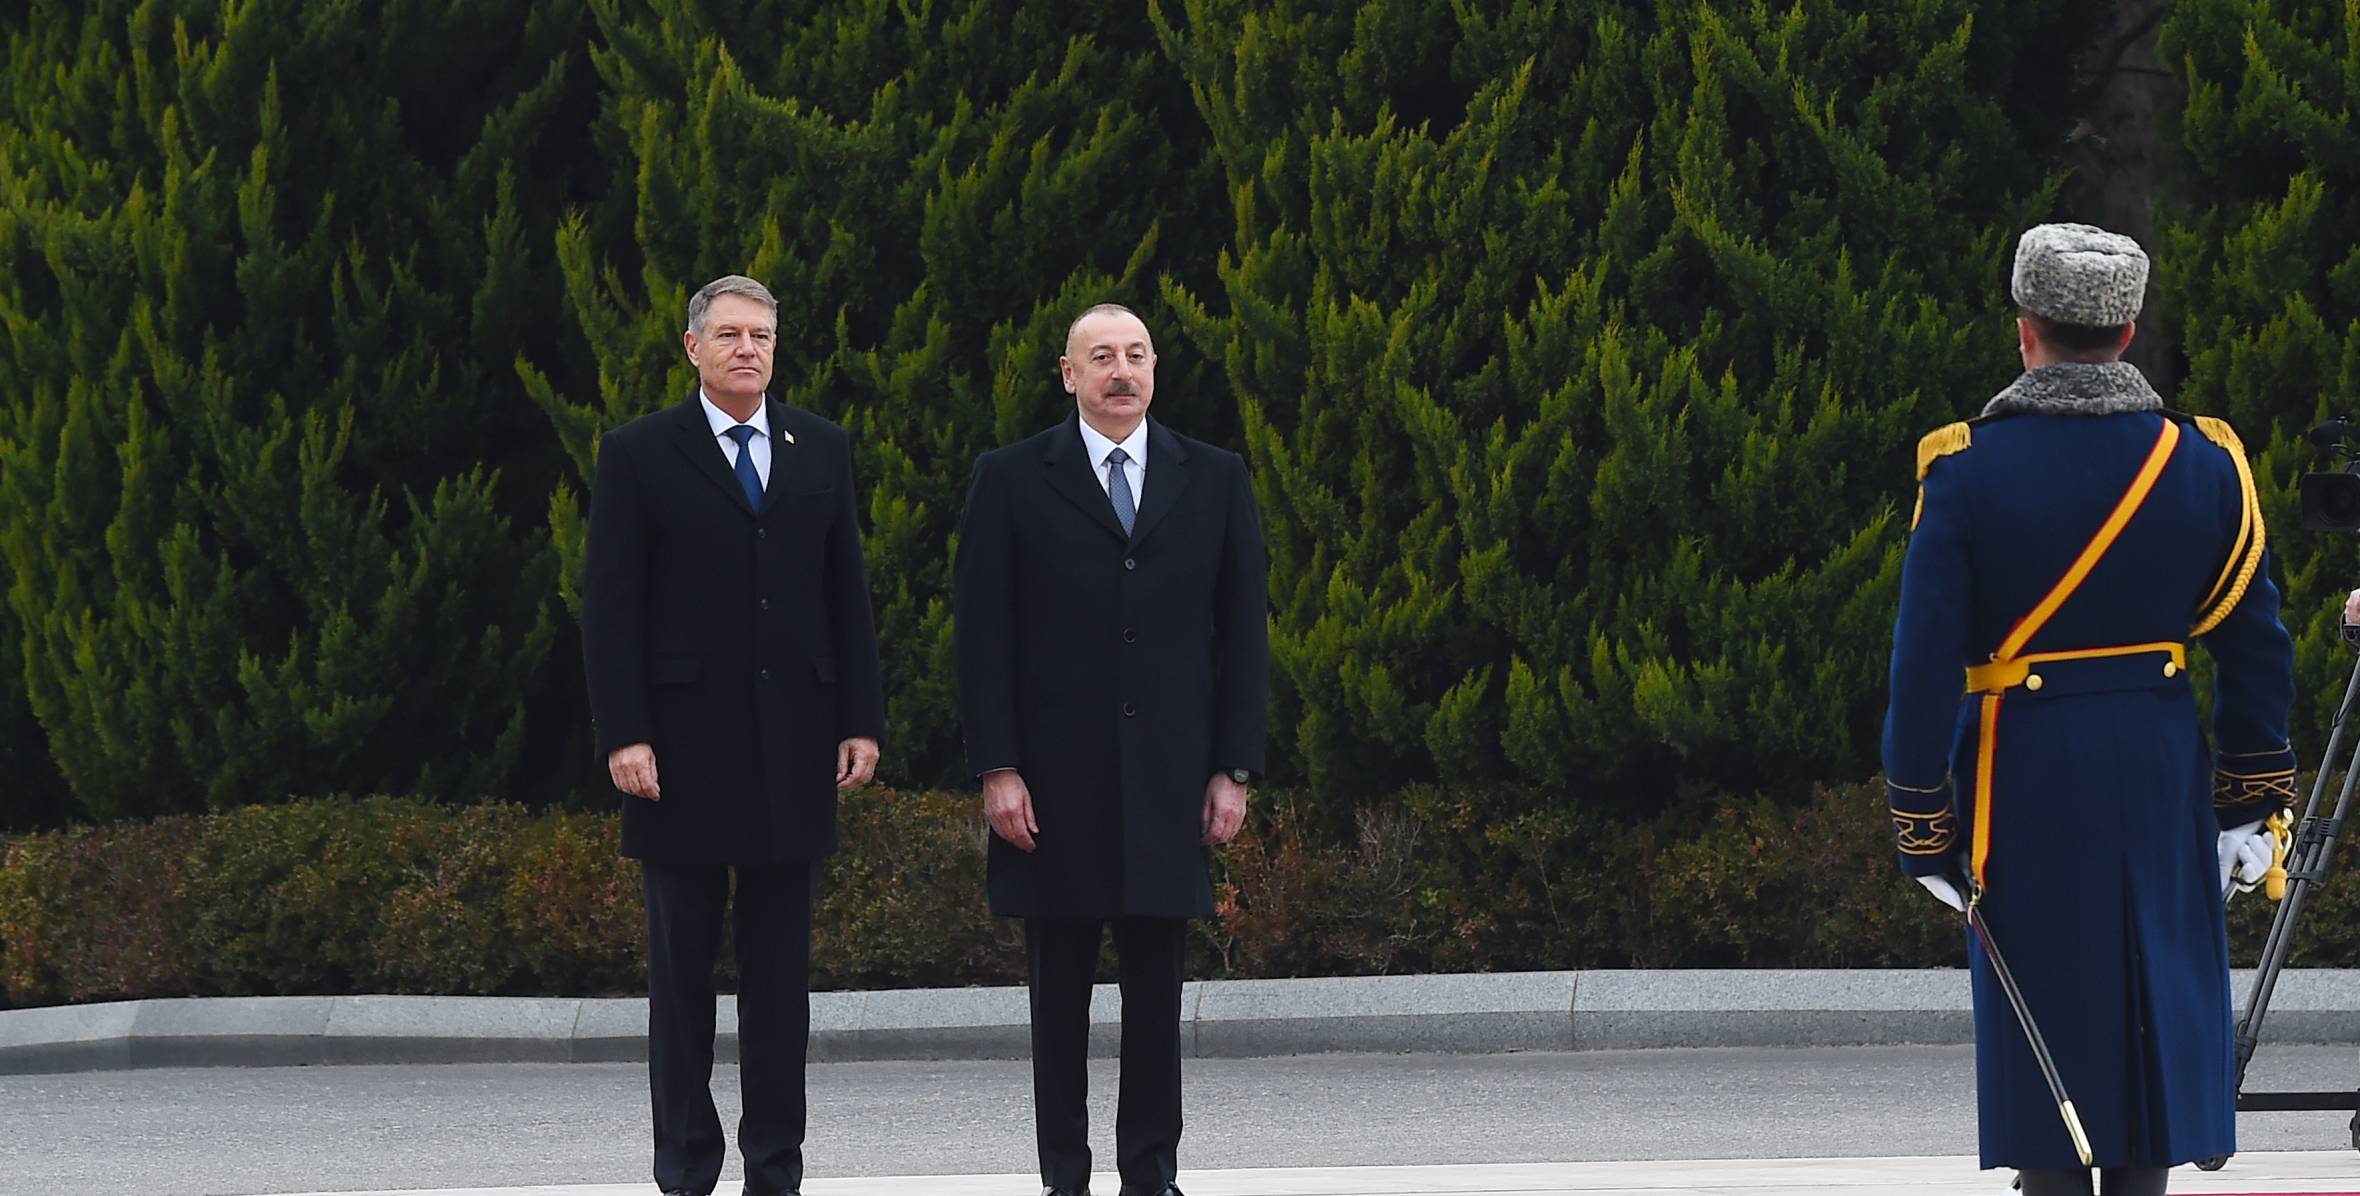 An official welcome ceremony has today been held for the President of Romania, Klaus Iohannis